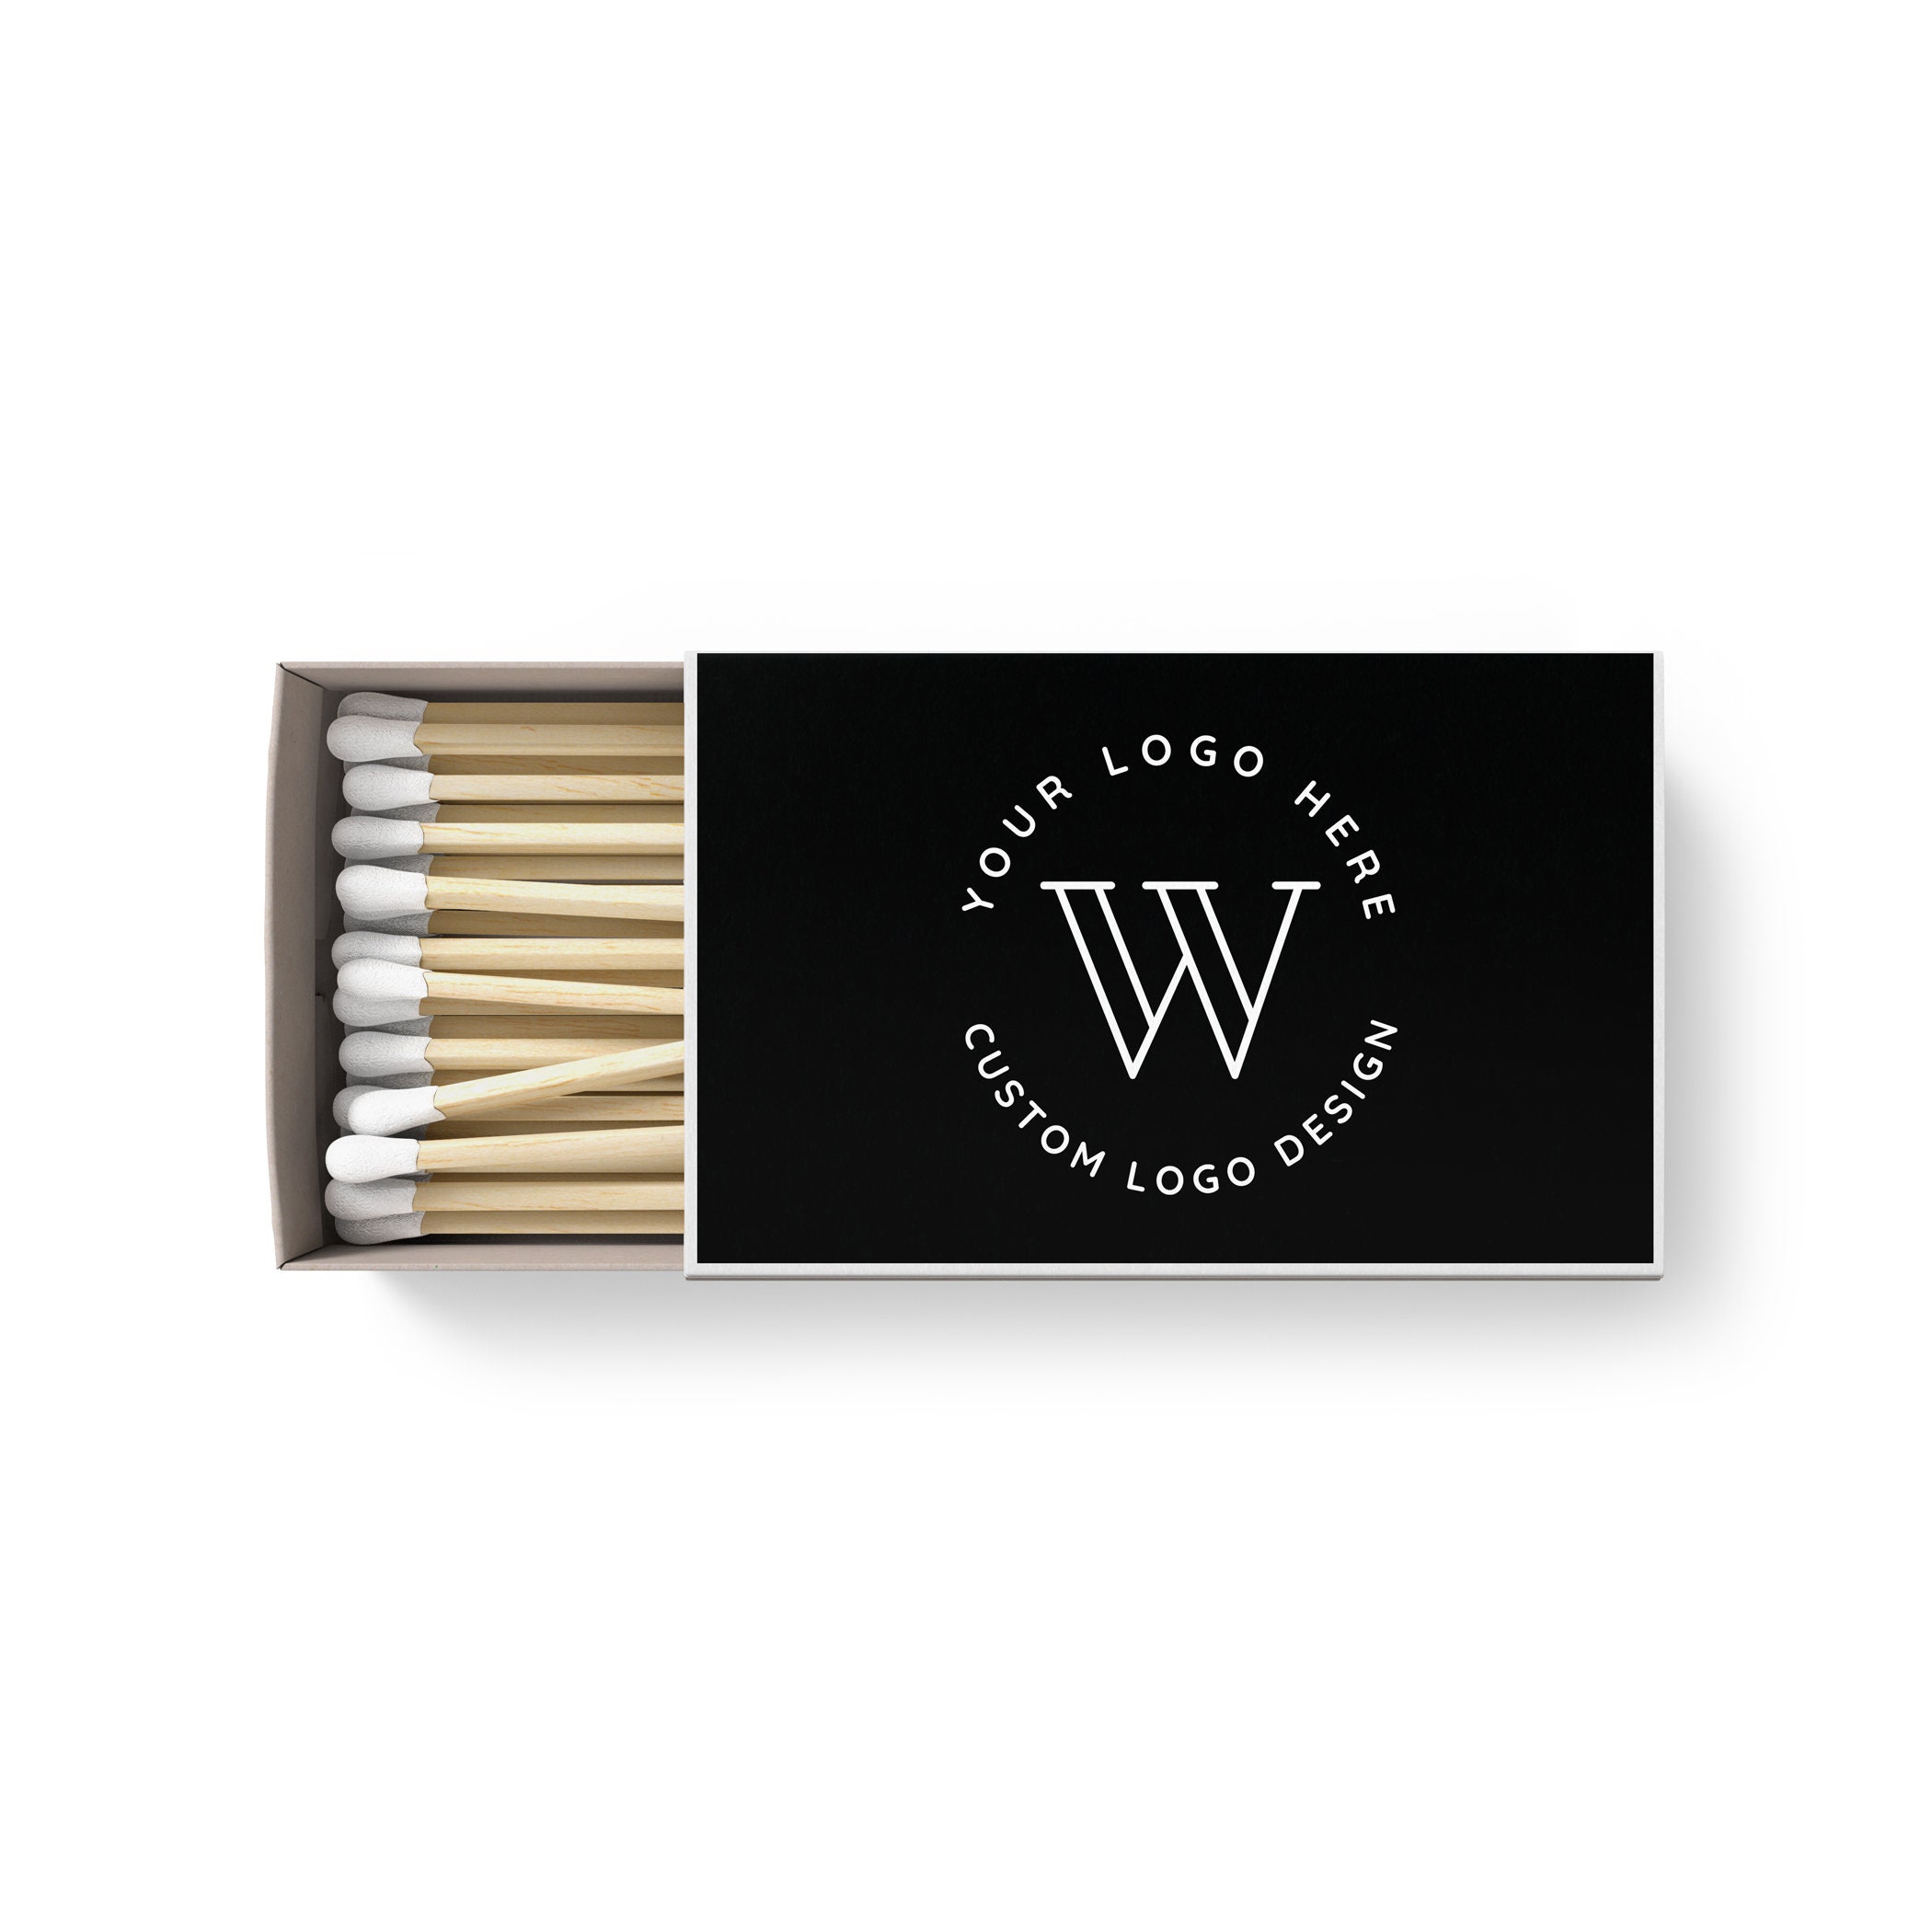 Ducky Days Promotional Match Box Matches - 50 Quantity - Promotional Product/Bulk with Your Logo/Customized (Black Box)